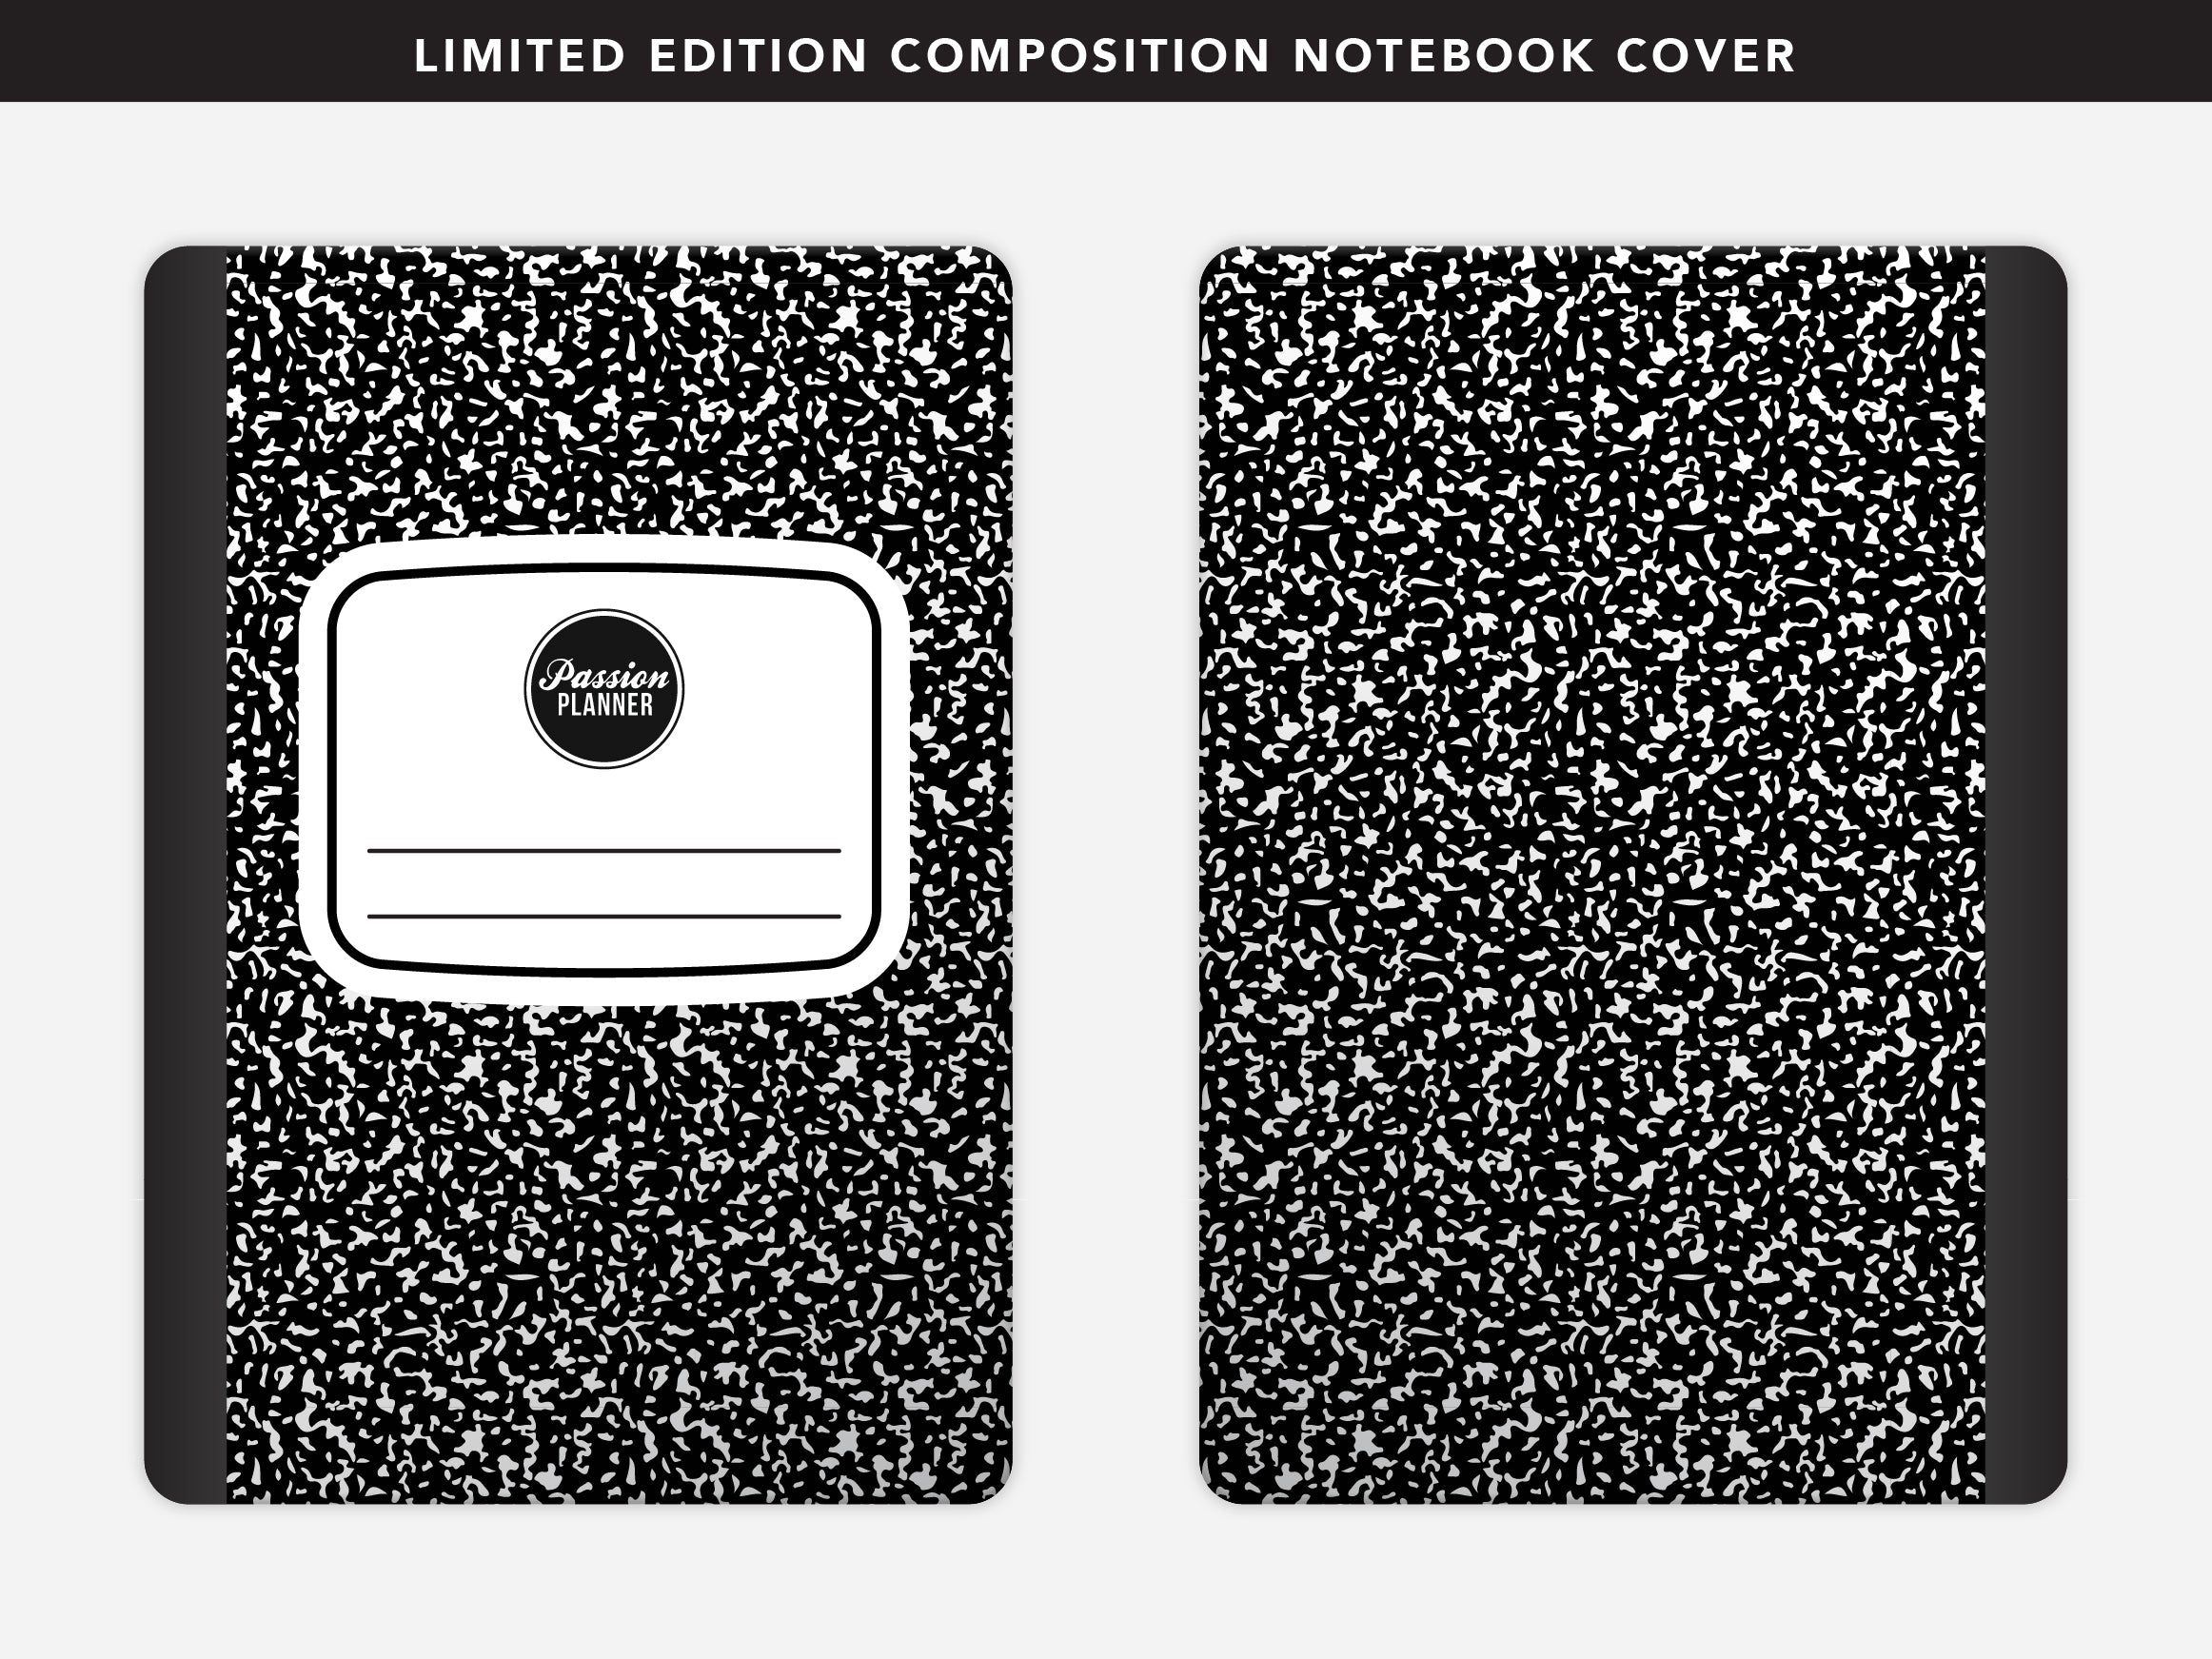 DIY Composition Cover Sticker Pack - Passion Planner